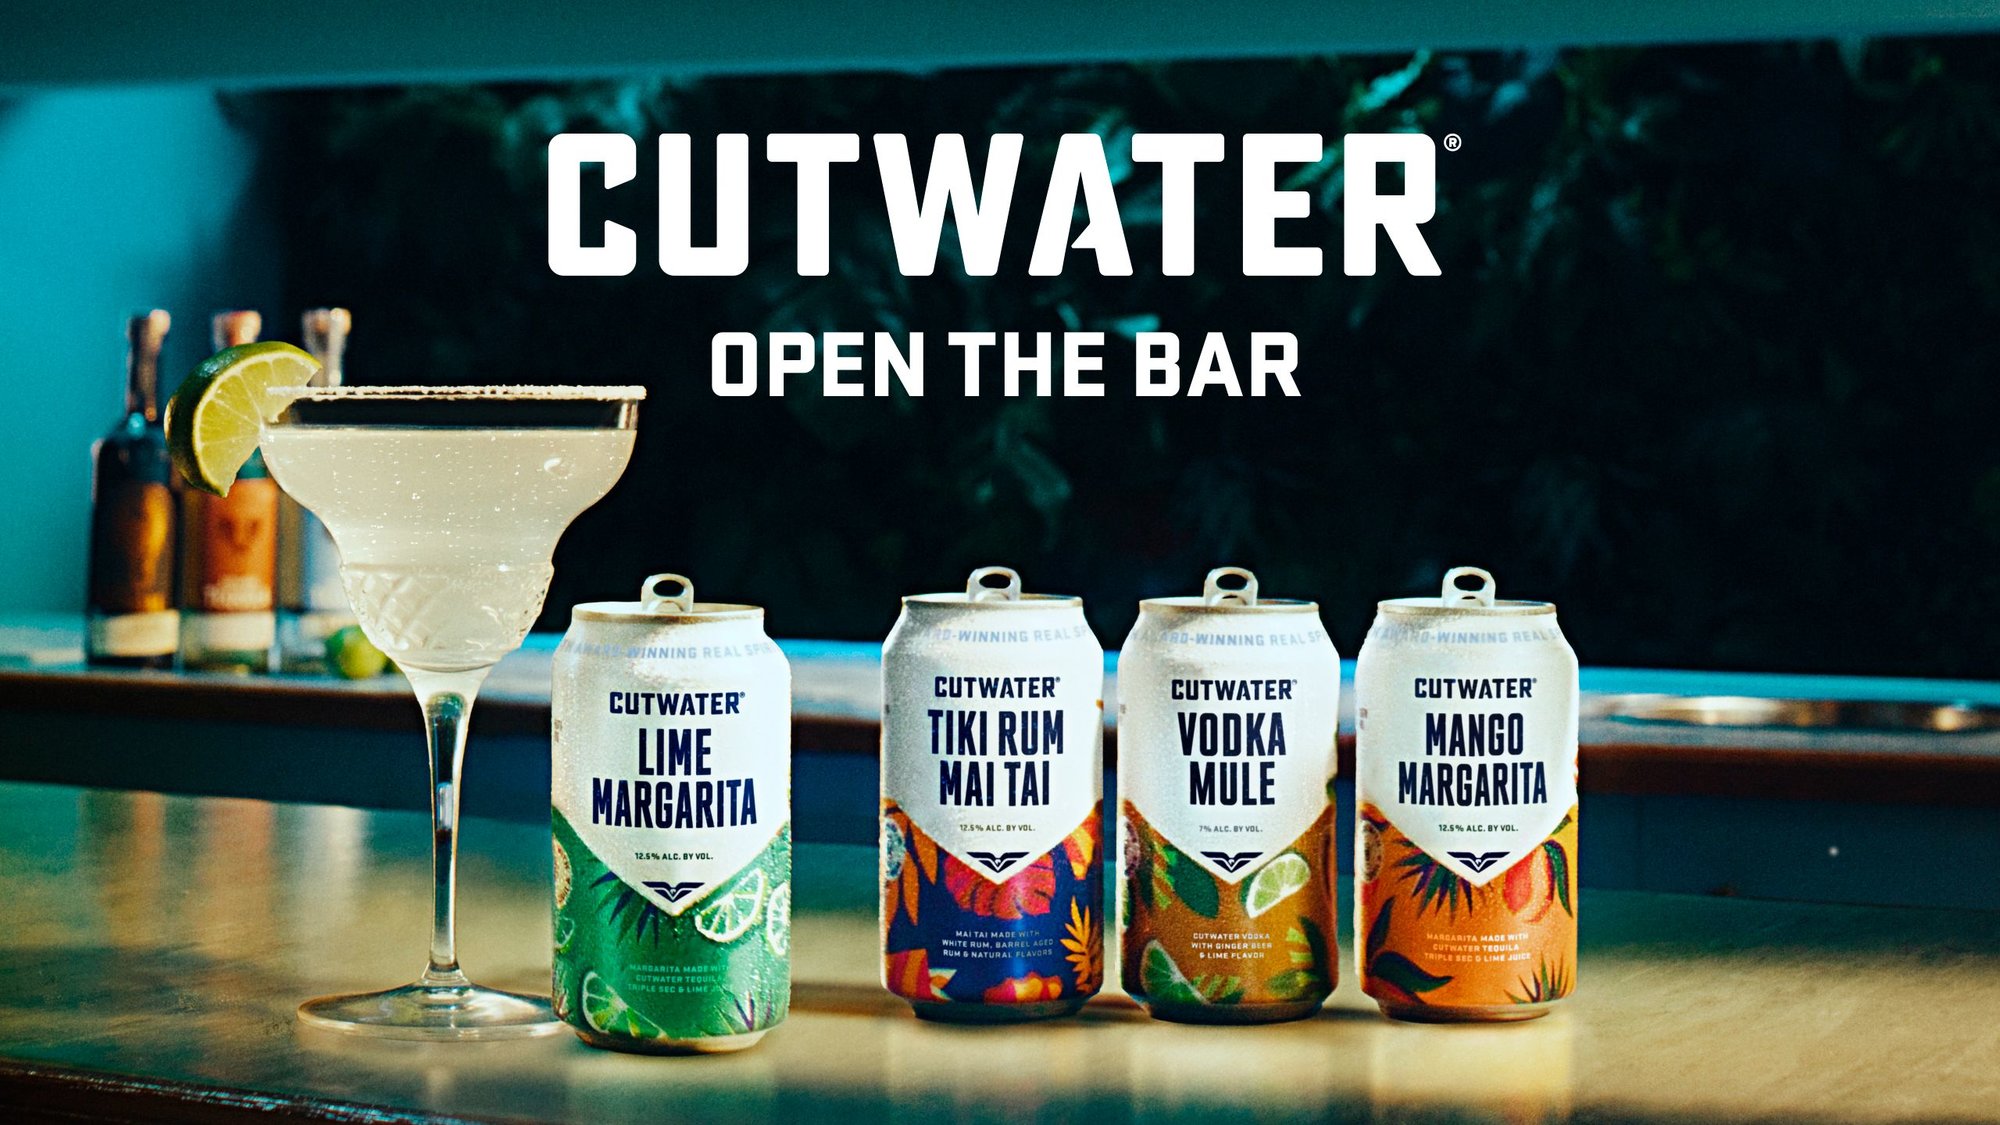 “Open The Bar”: Cutwater Aims To Make Cocktail Culture More Accessible With New Campaign And Visual Refresh